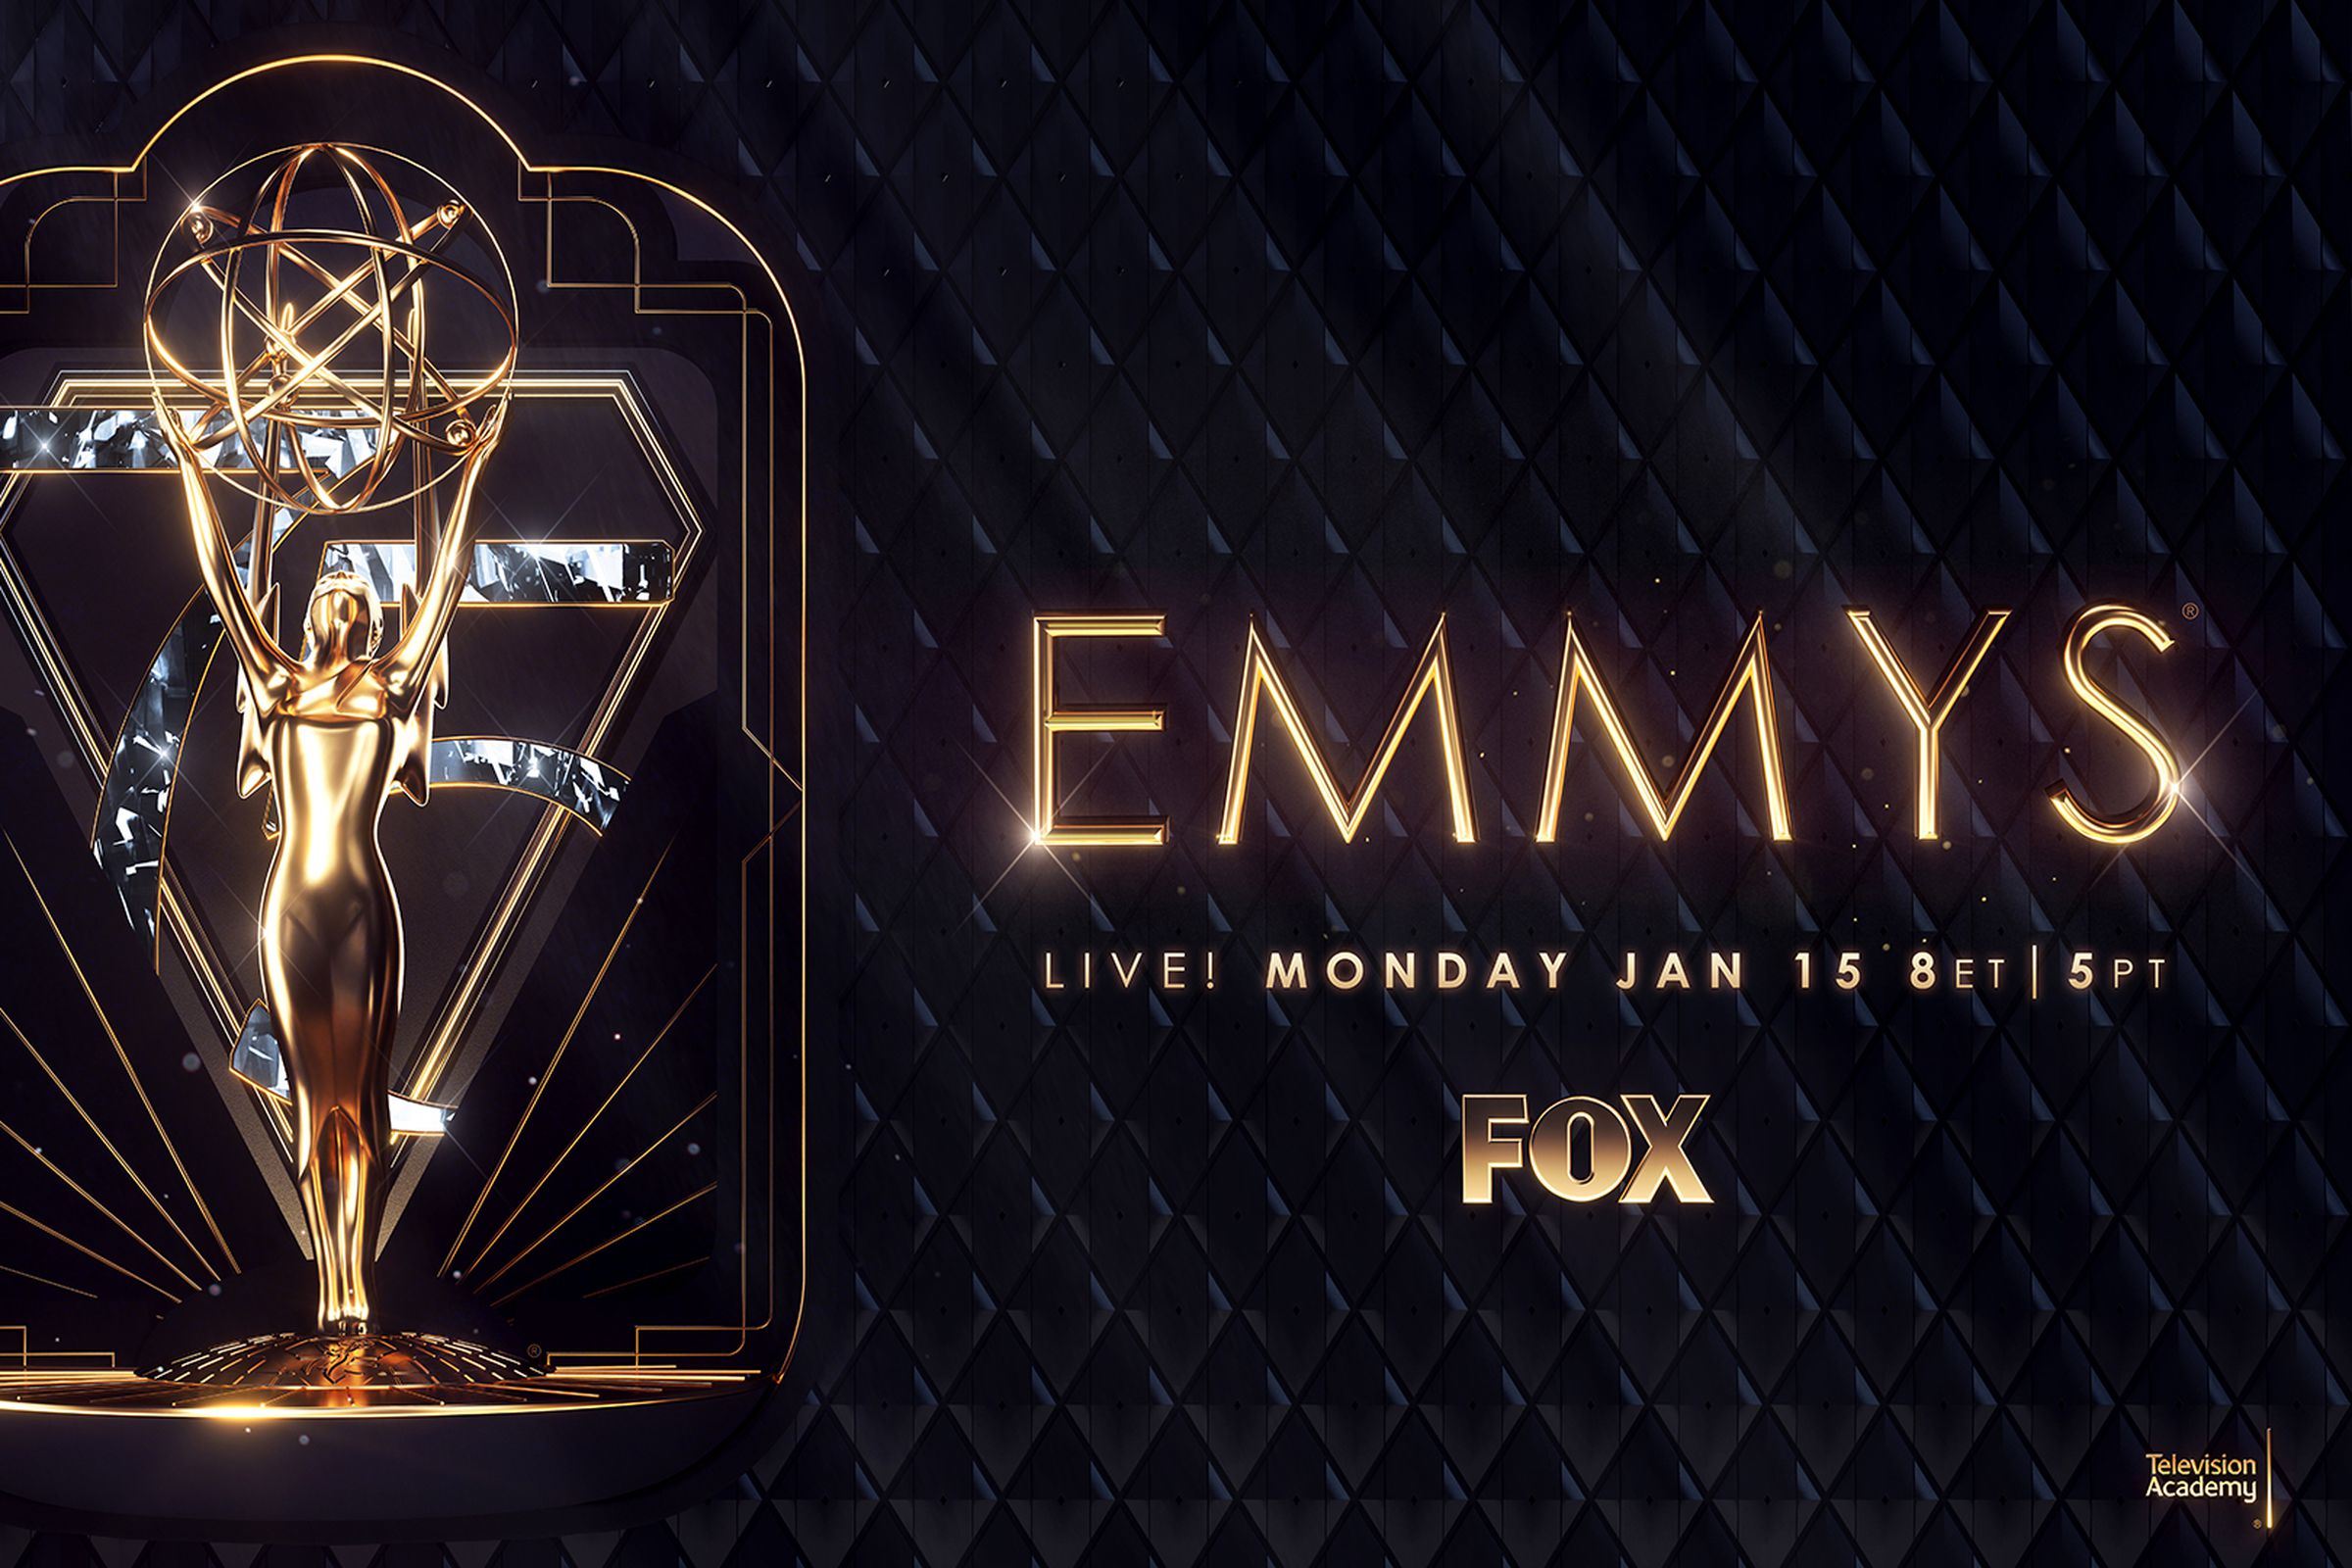 A graphic showing the Emmys on Fox